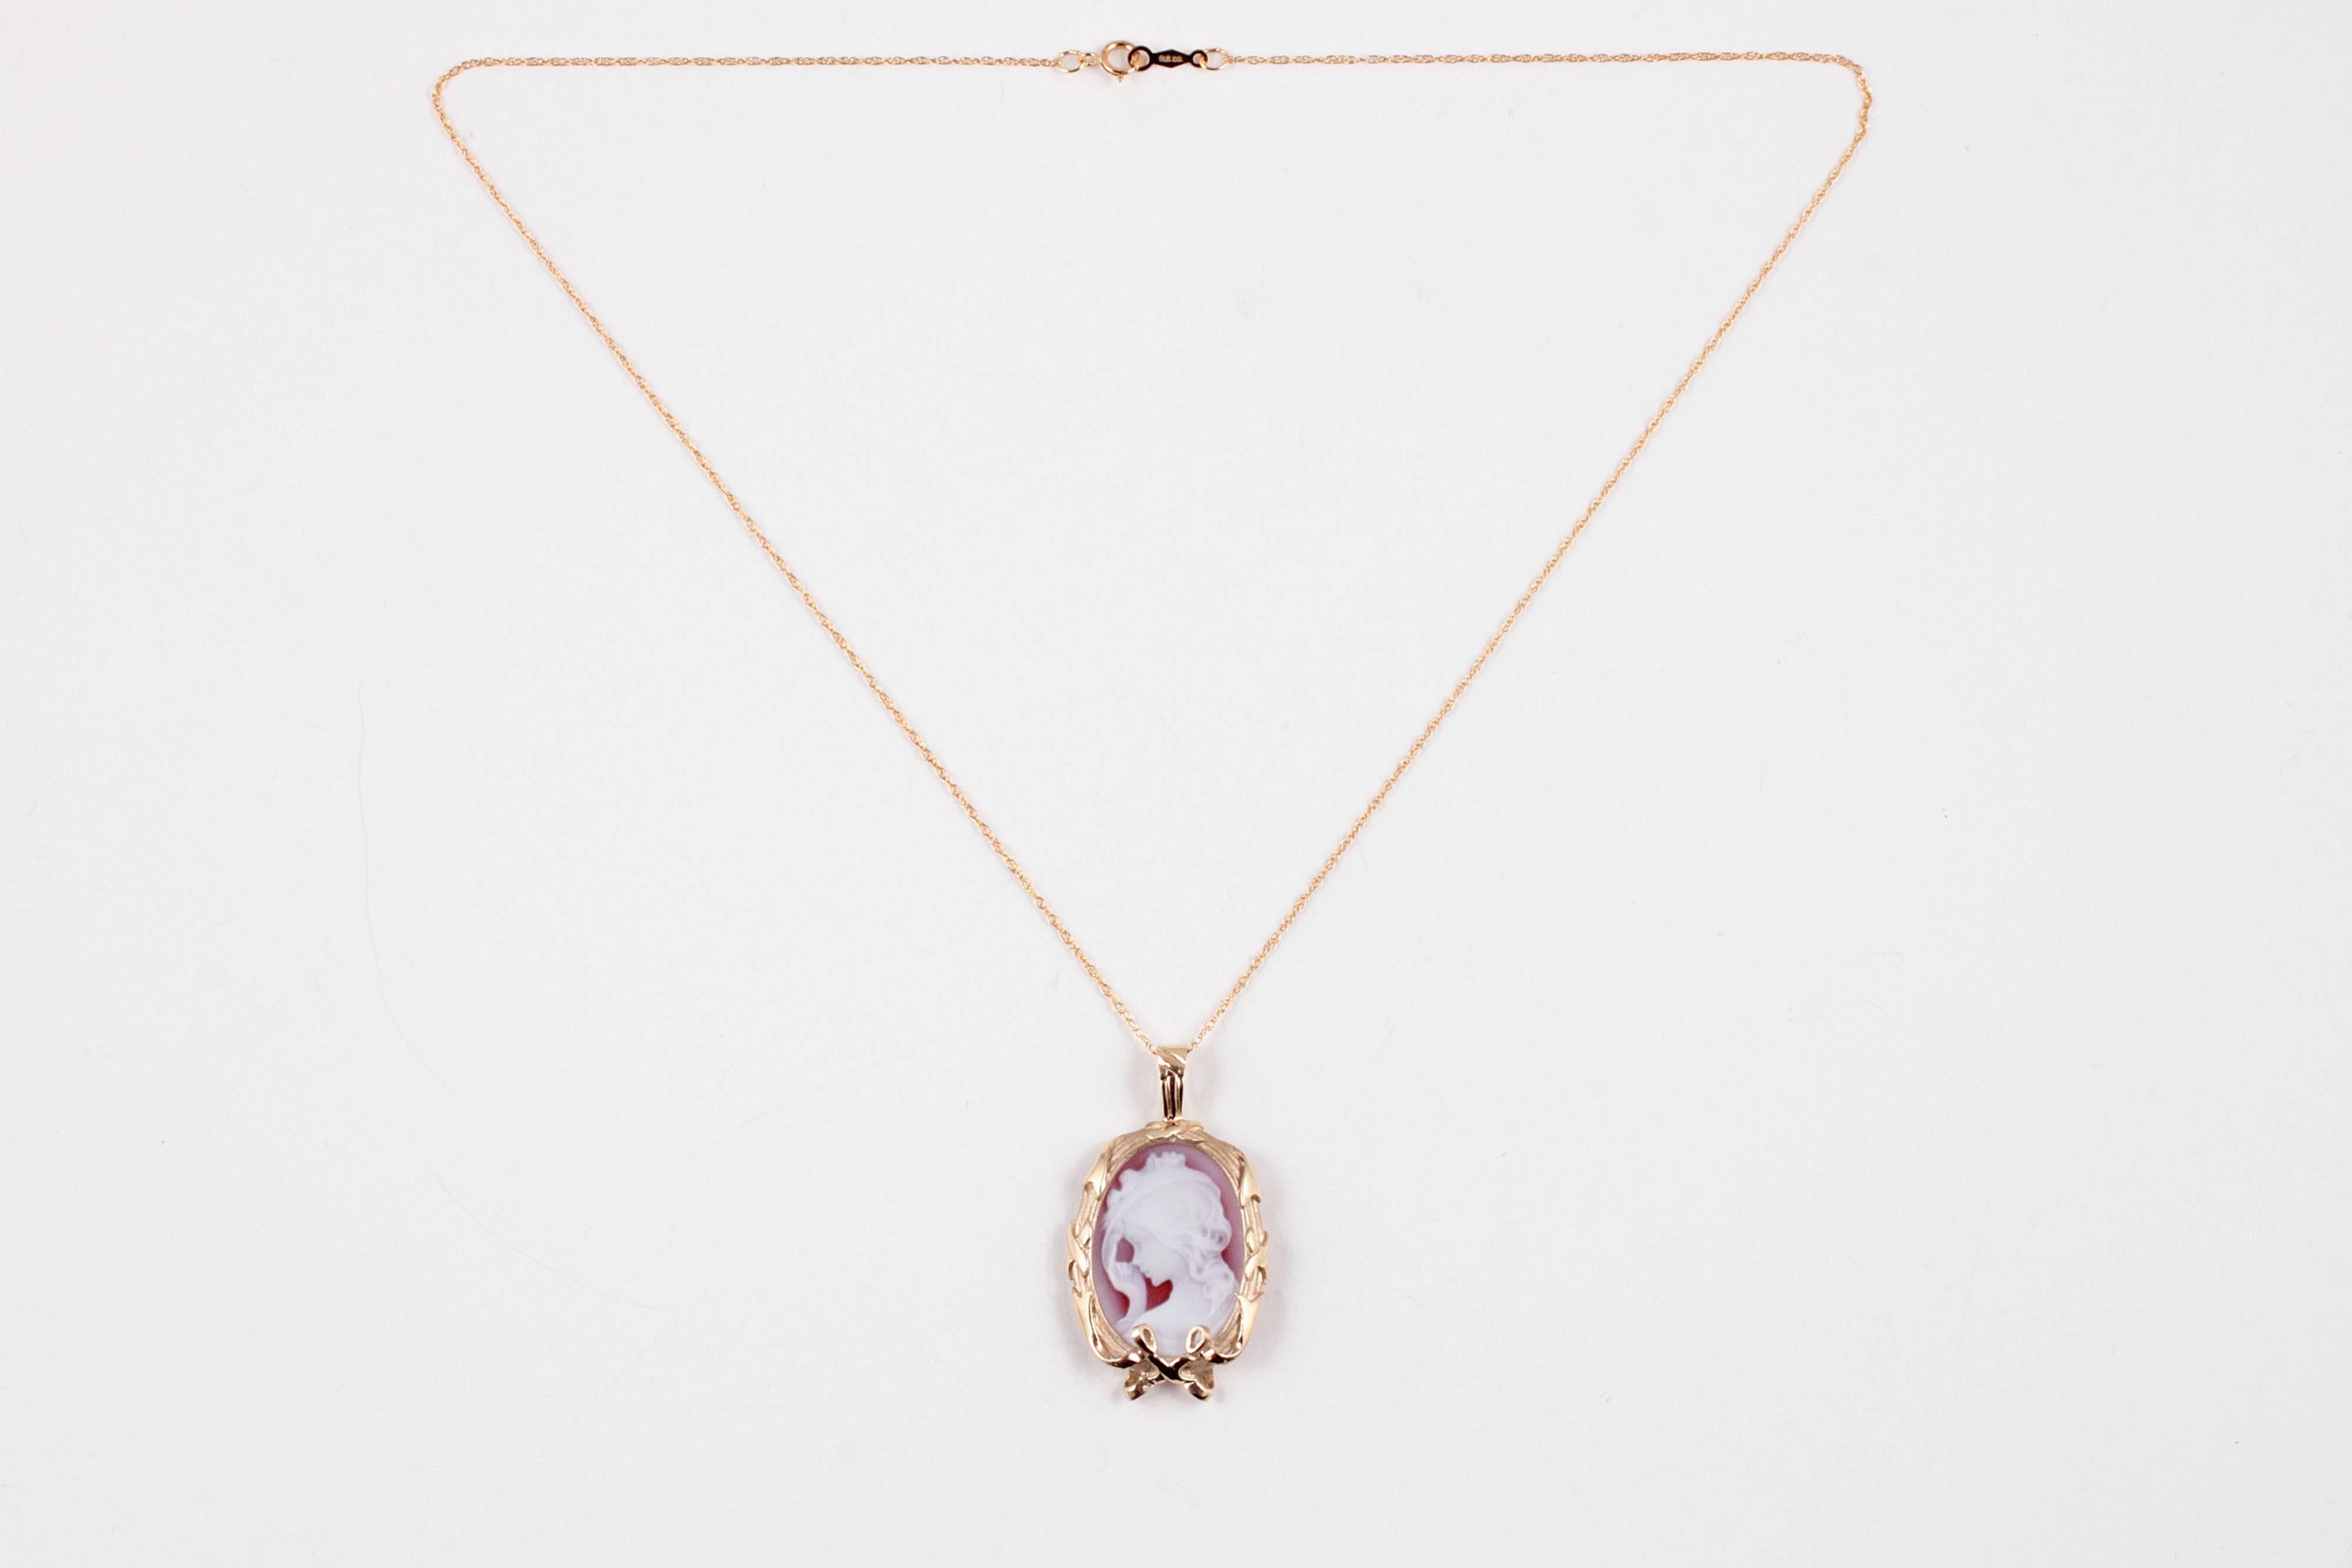 10 karat Sardonyx Cameo pendant on 18 inch gold filled chain.  Lovely and special!